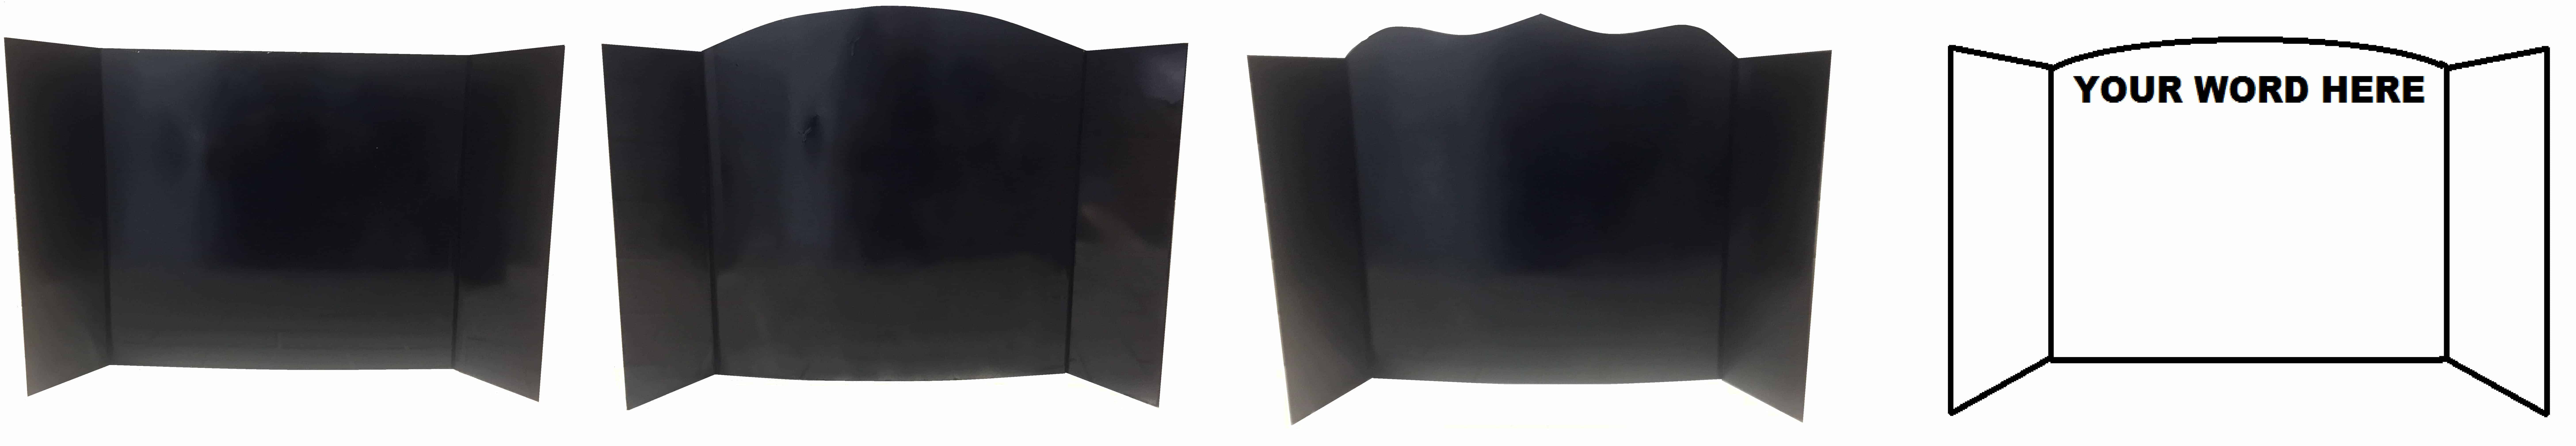 fireplace heat reflector shield which one to buy